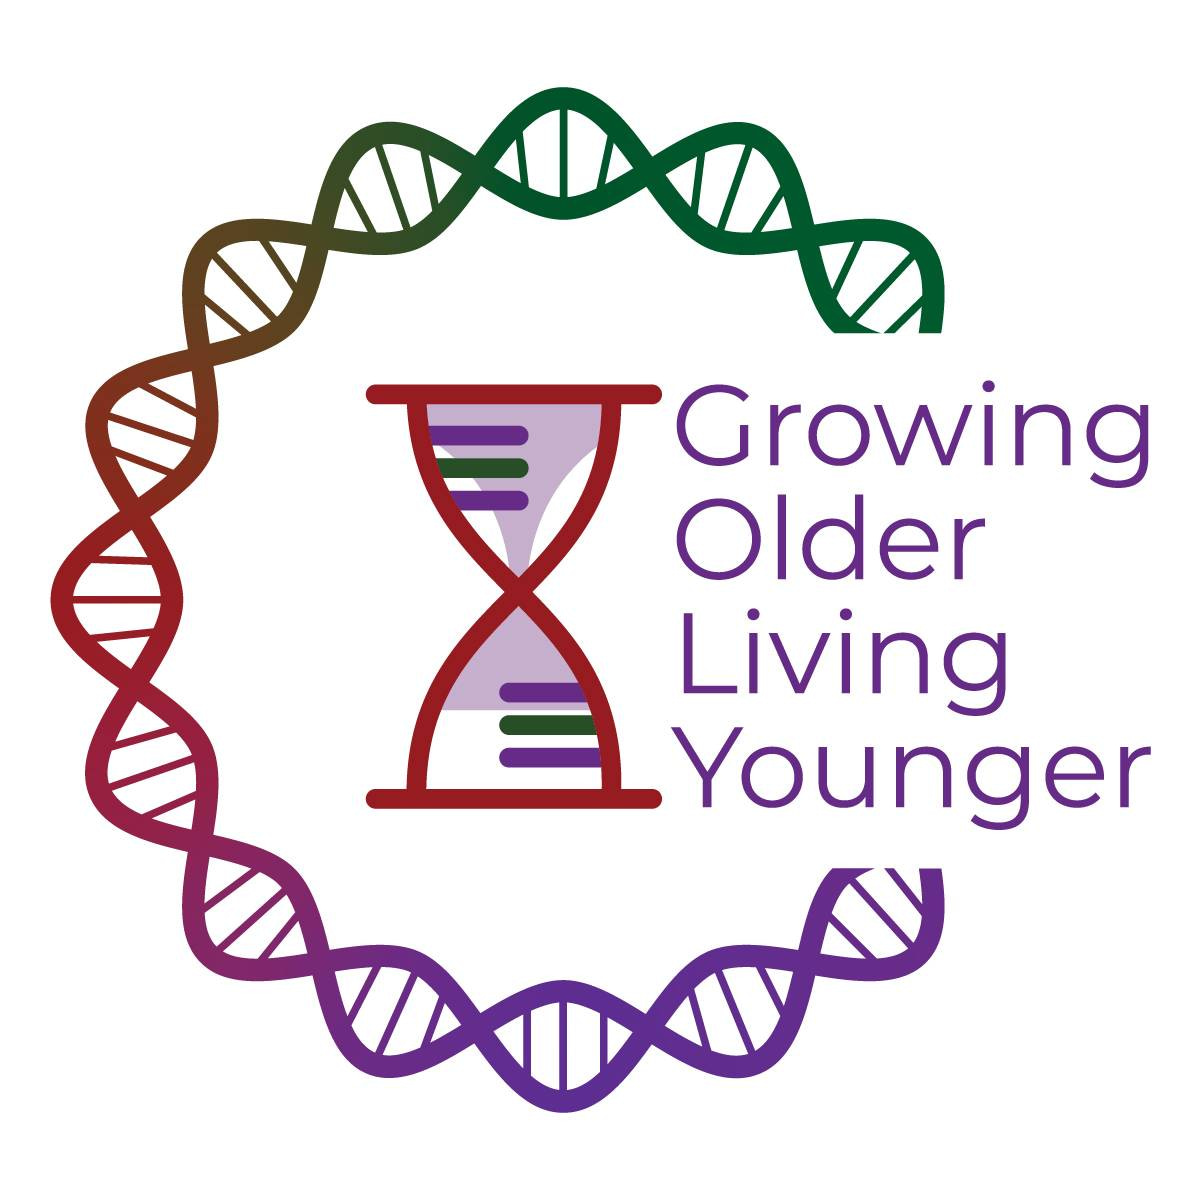 Growing Older, Living Younger